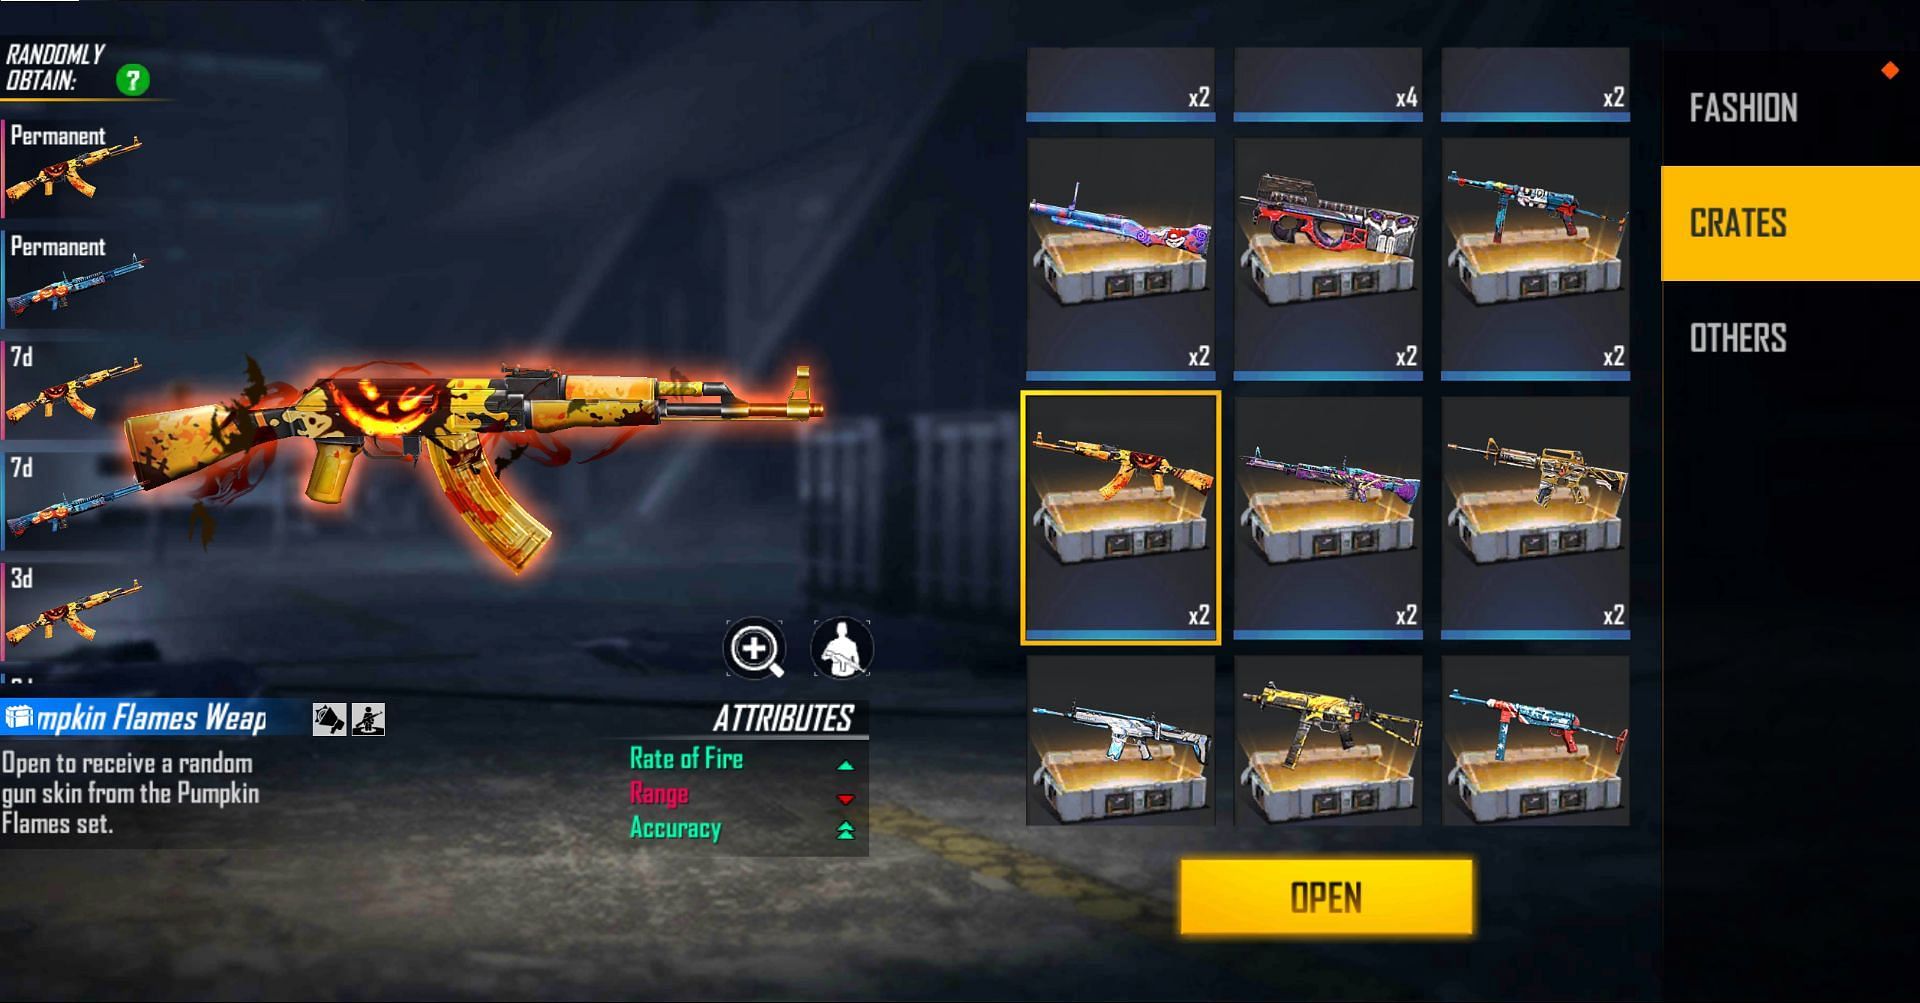 Pumpkin Flames Weapon Loot Crate can offer these rewards (image via Free Fire)